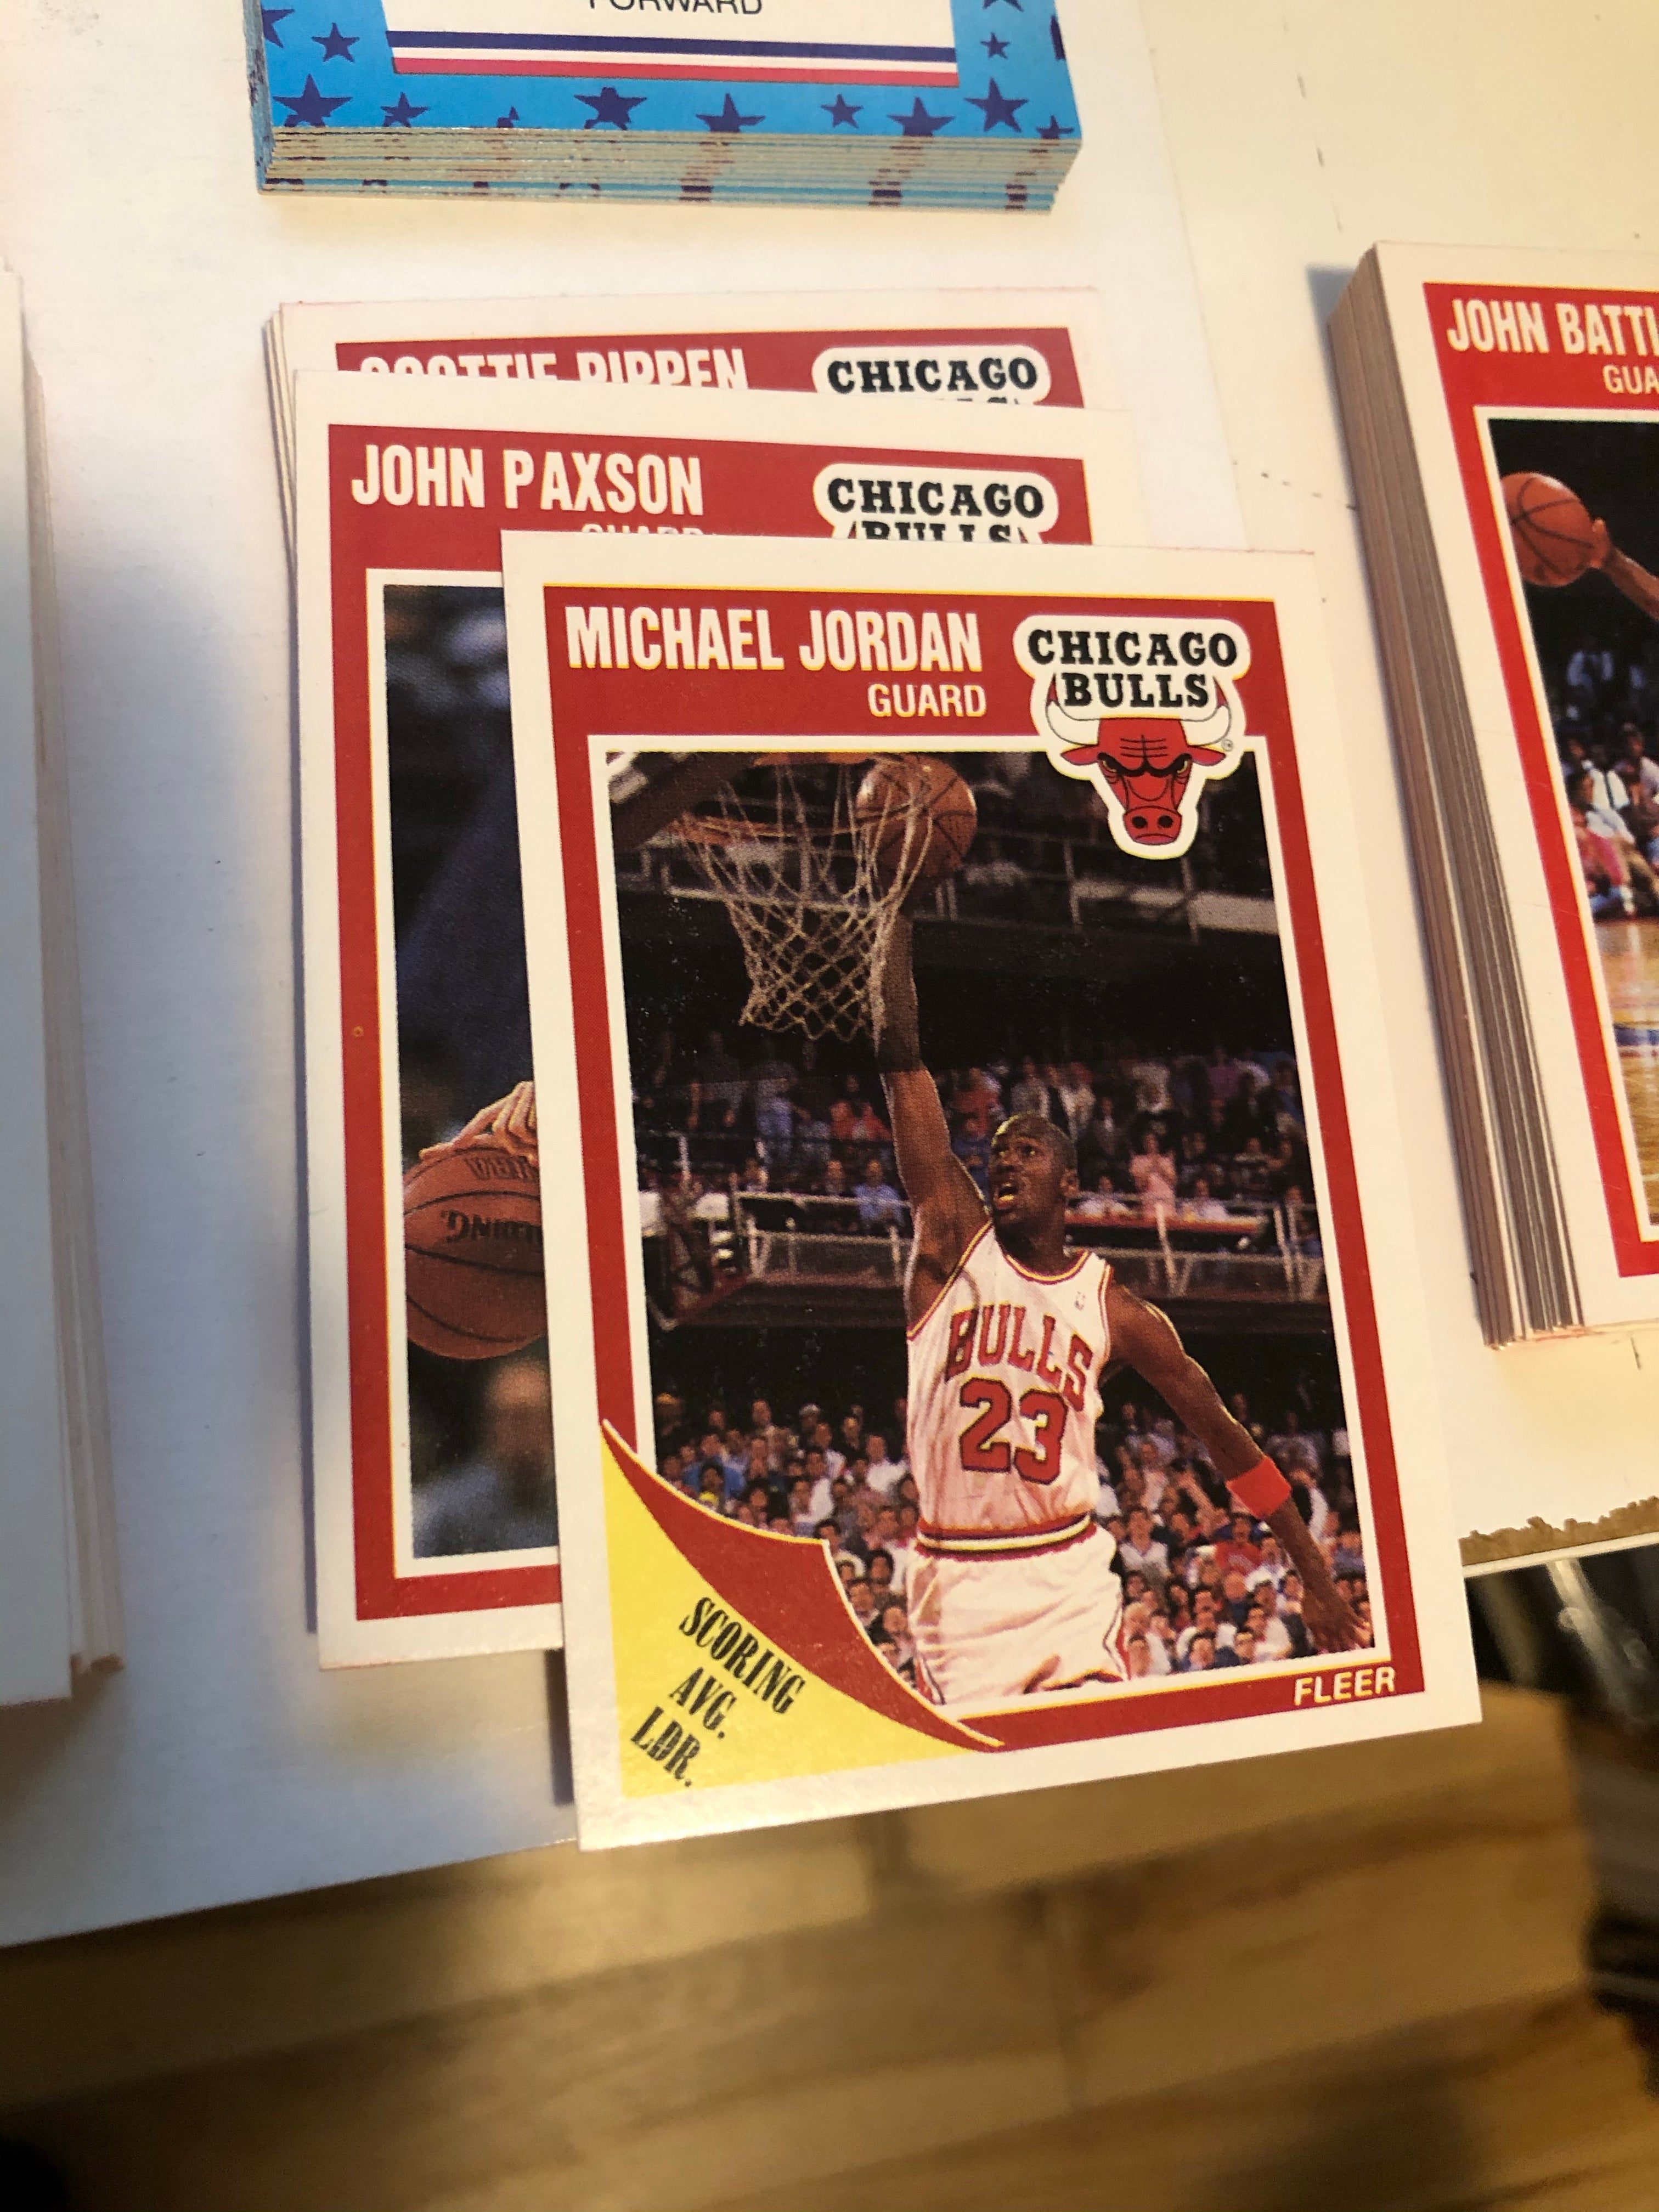 1989 Fleer basketball high grade condition cards and stickers set